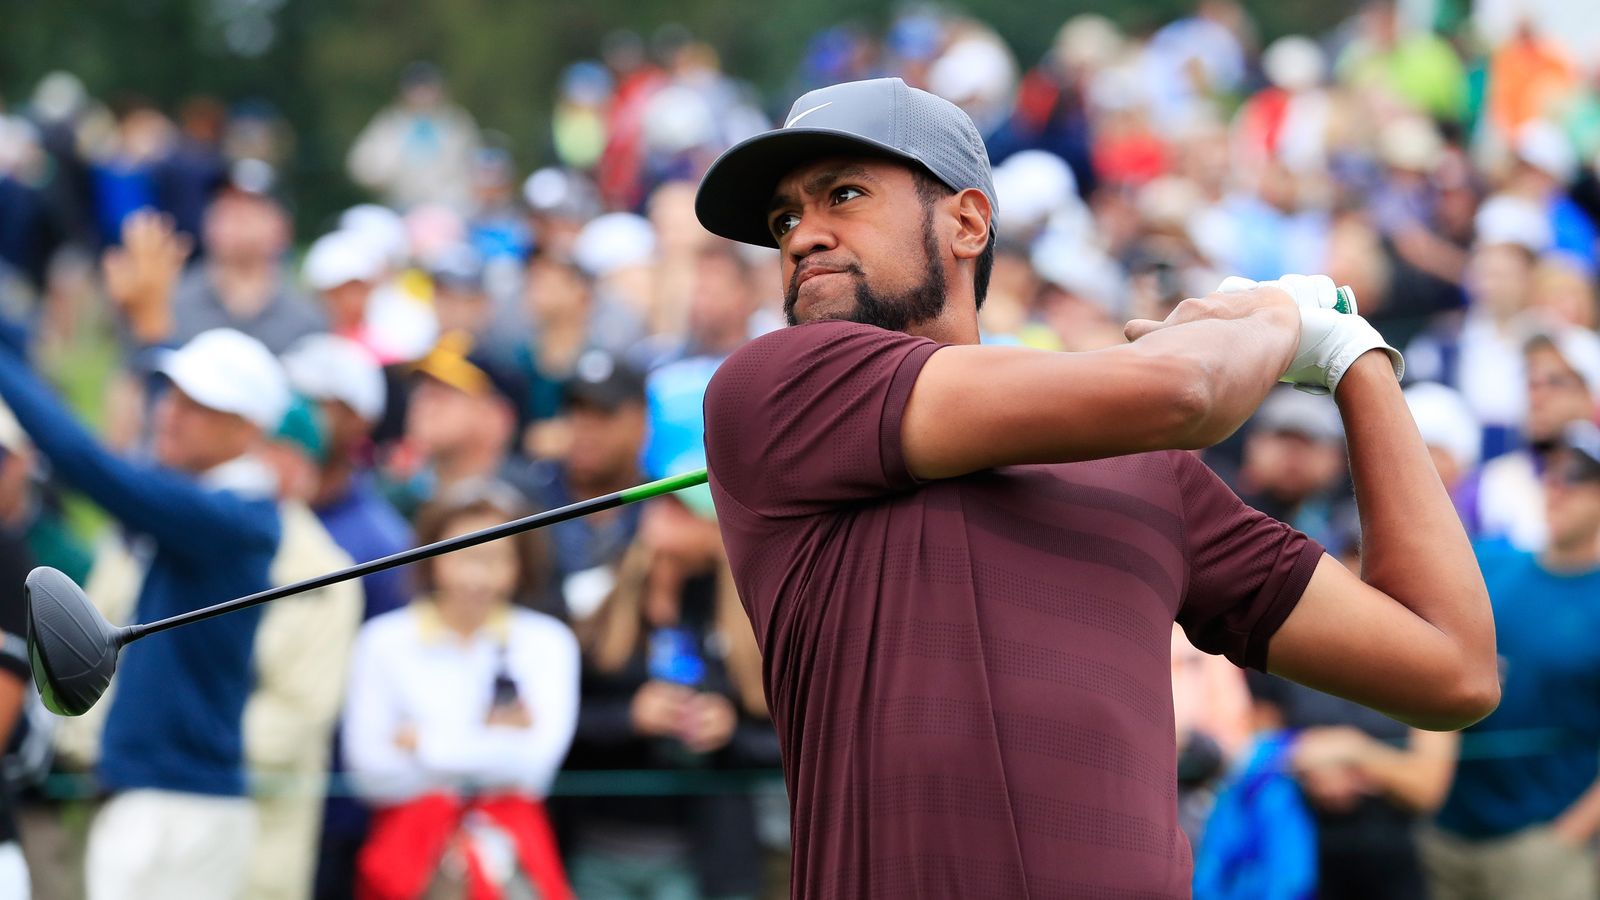 Tony Finau excited to make Ryder Cup debut after wildcard pick Golf